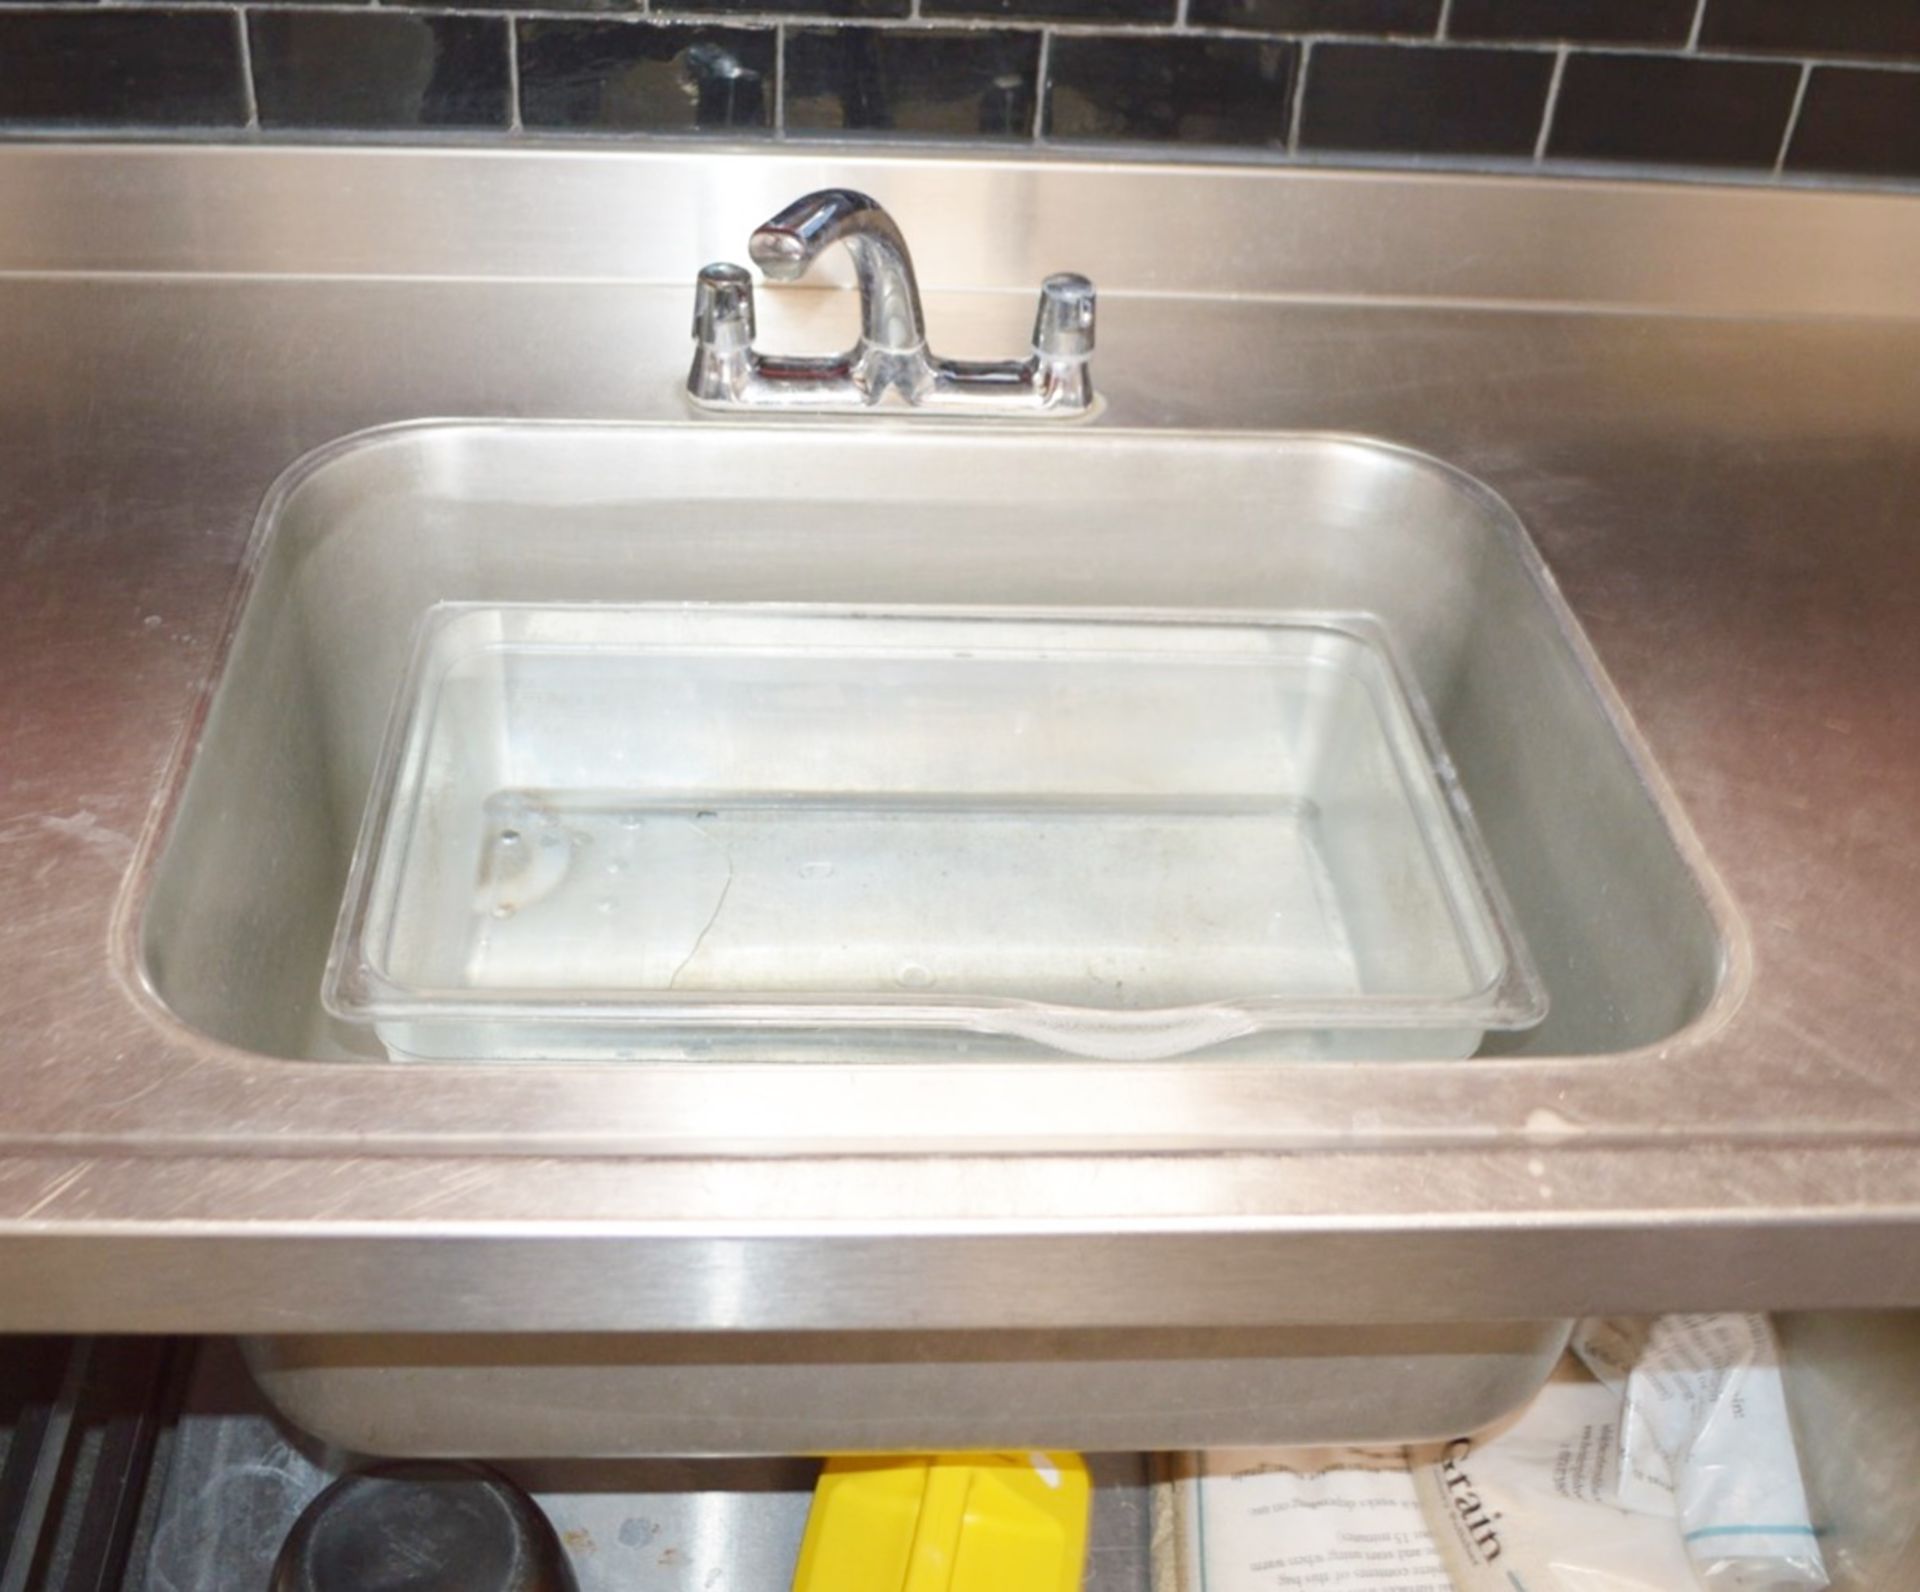 1 x Large Stainless Steel Wash Prep Table - Features Large Sink Bowl With Mixer Taps, Undershelf, - Image 3 of 3